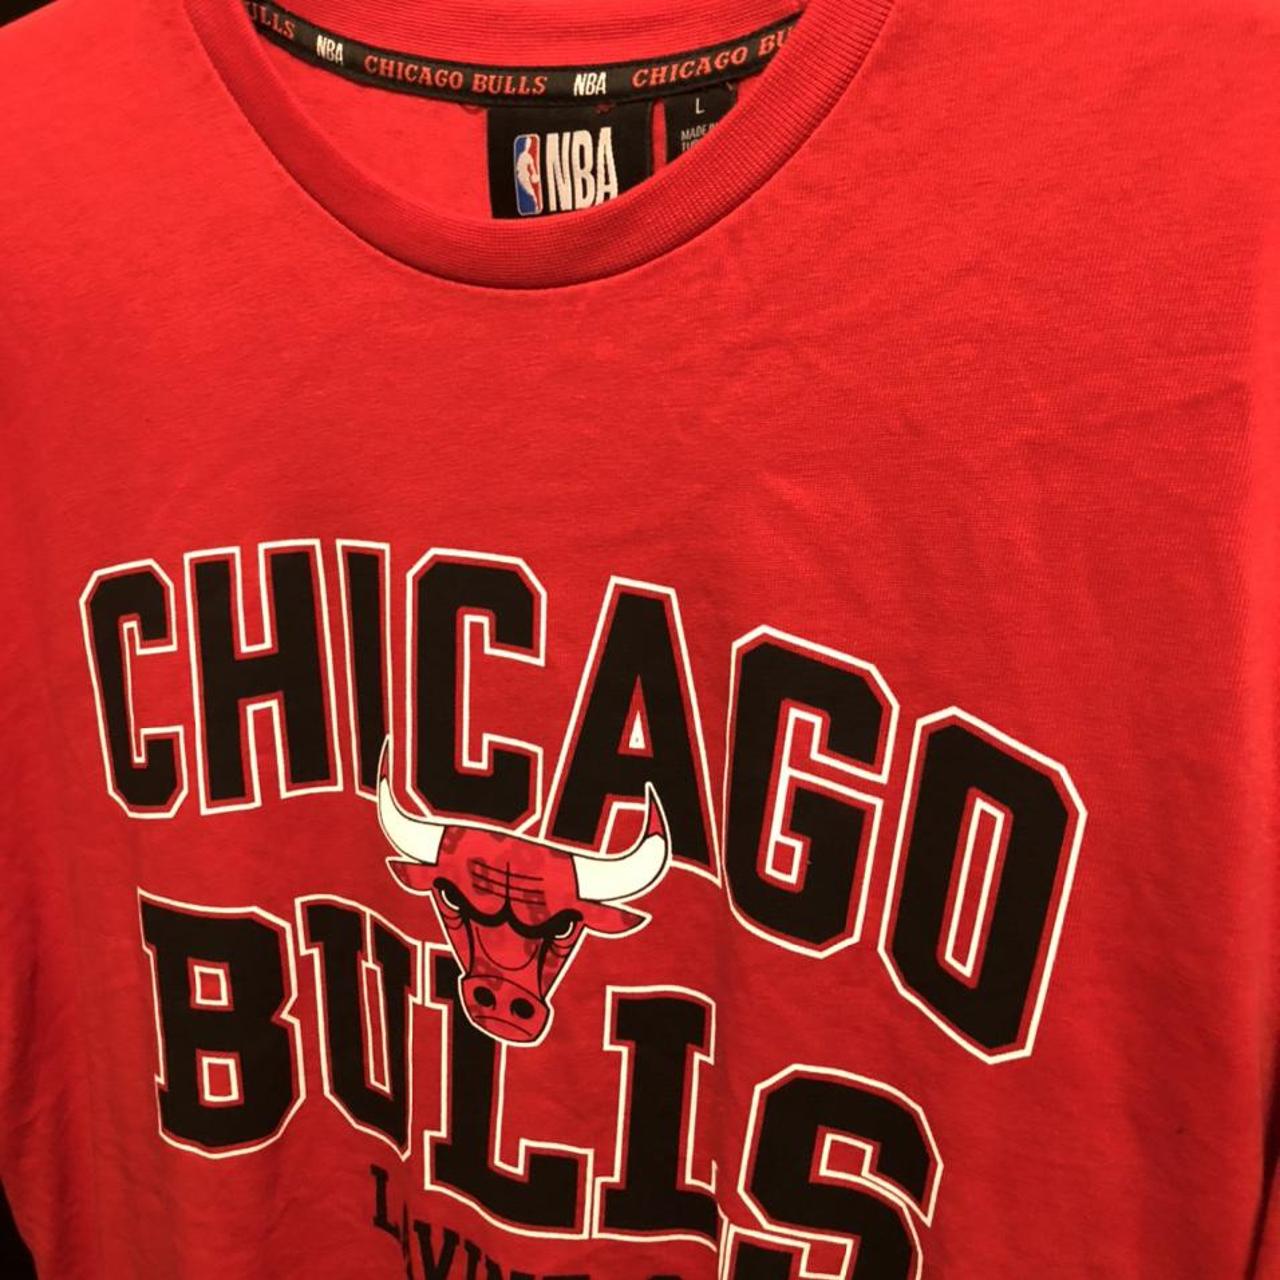 Product Image 2 - NBA Chicago Bulls T-Shirt.

Size is